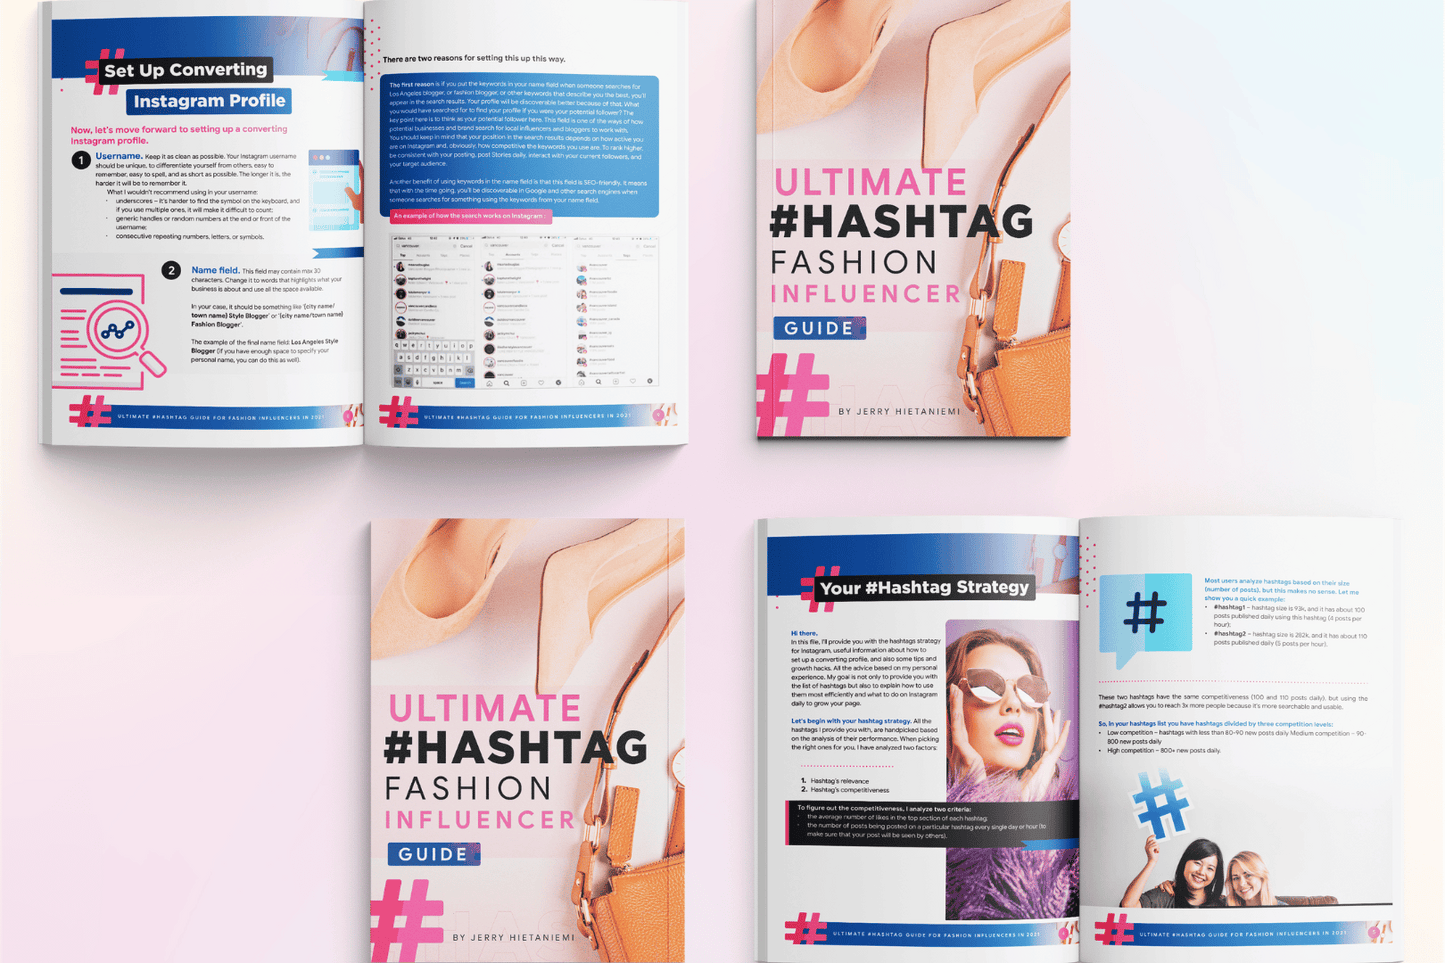 Hashtag Guide For Fashion Influencers